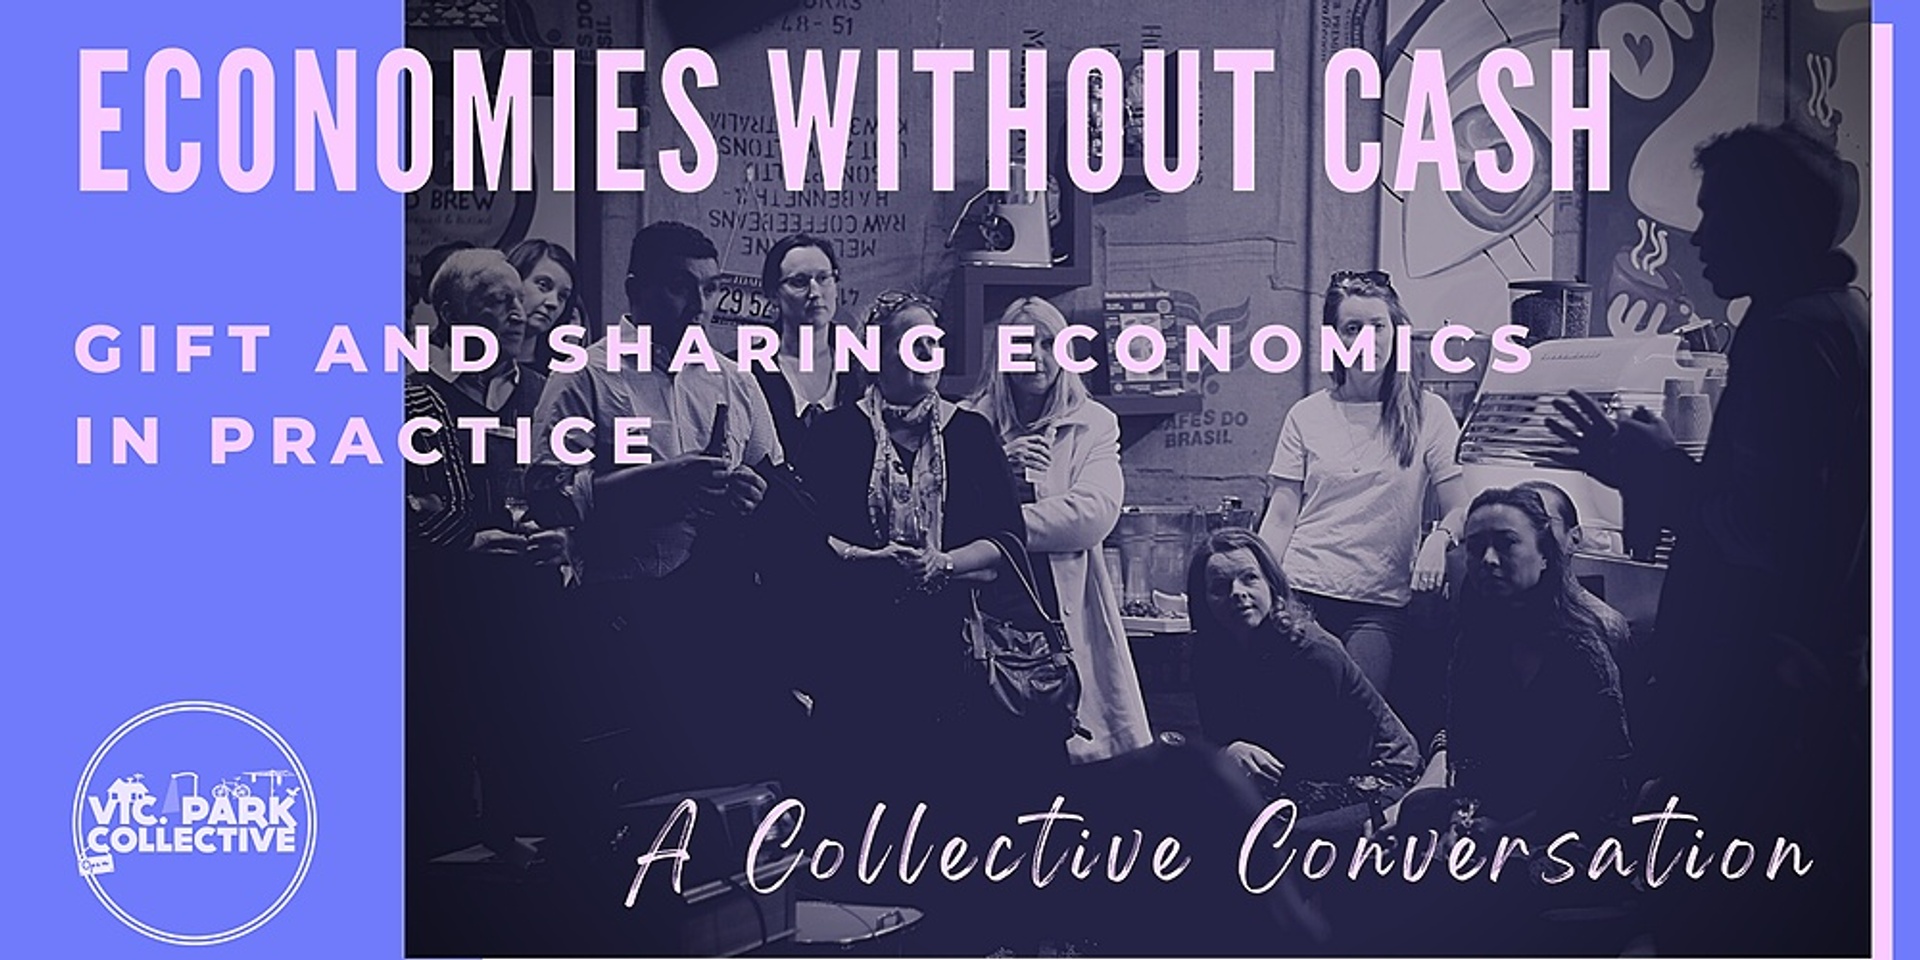 Economies without cash - gift & sharing economics in practice